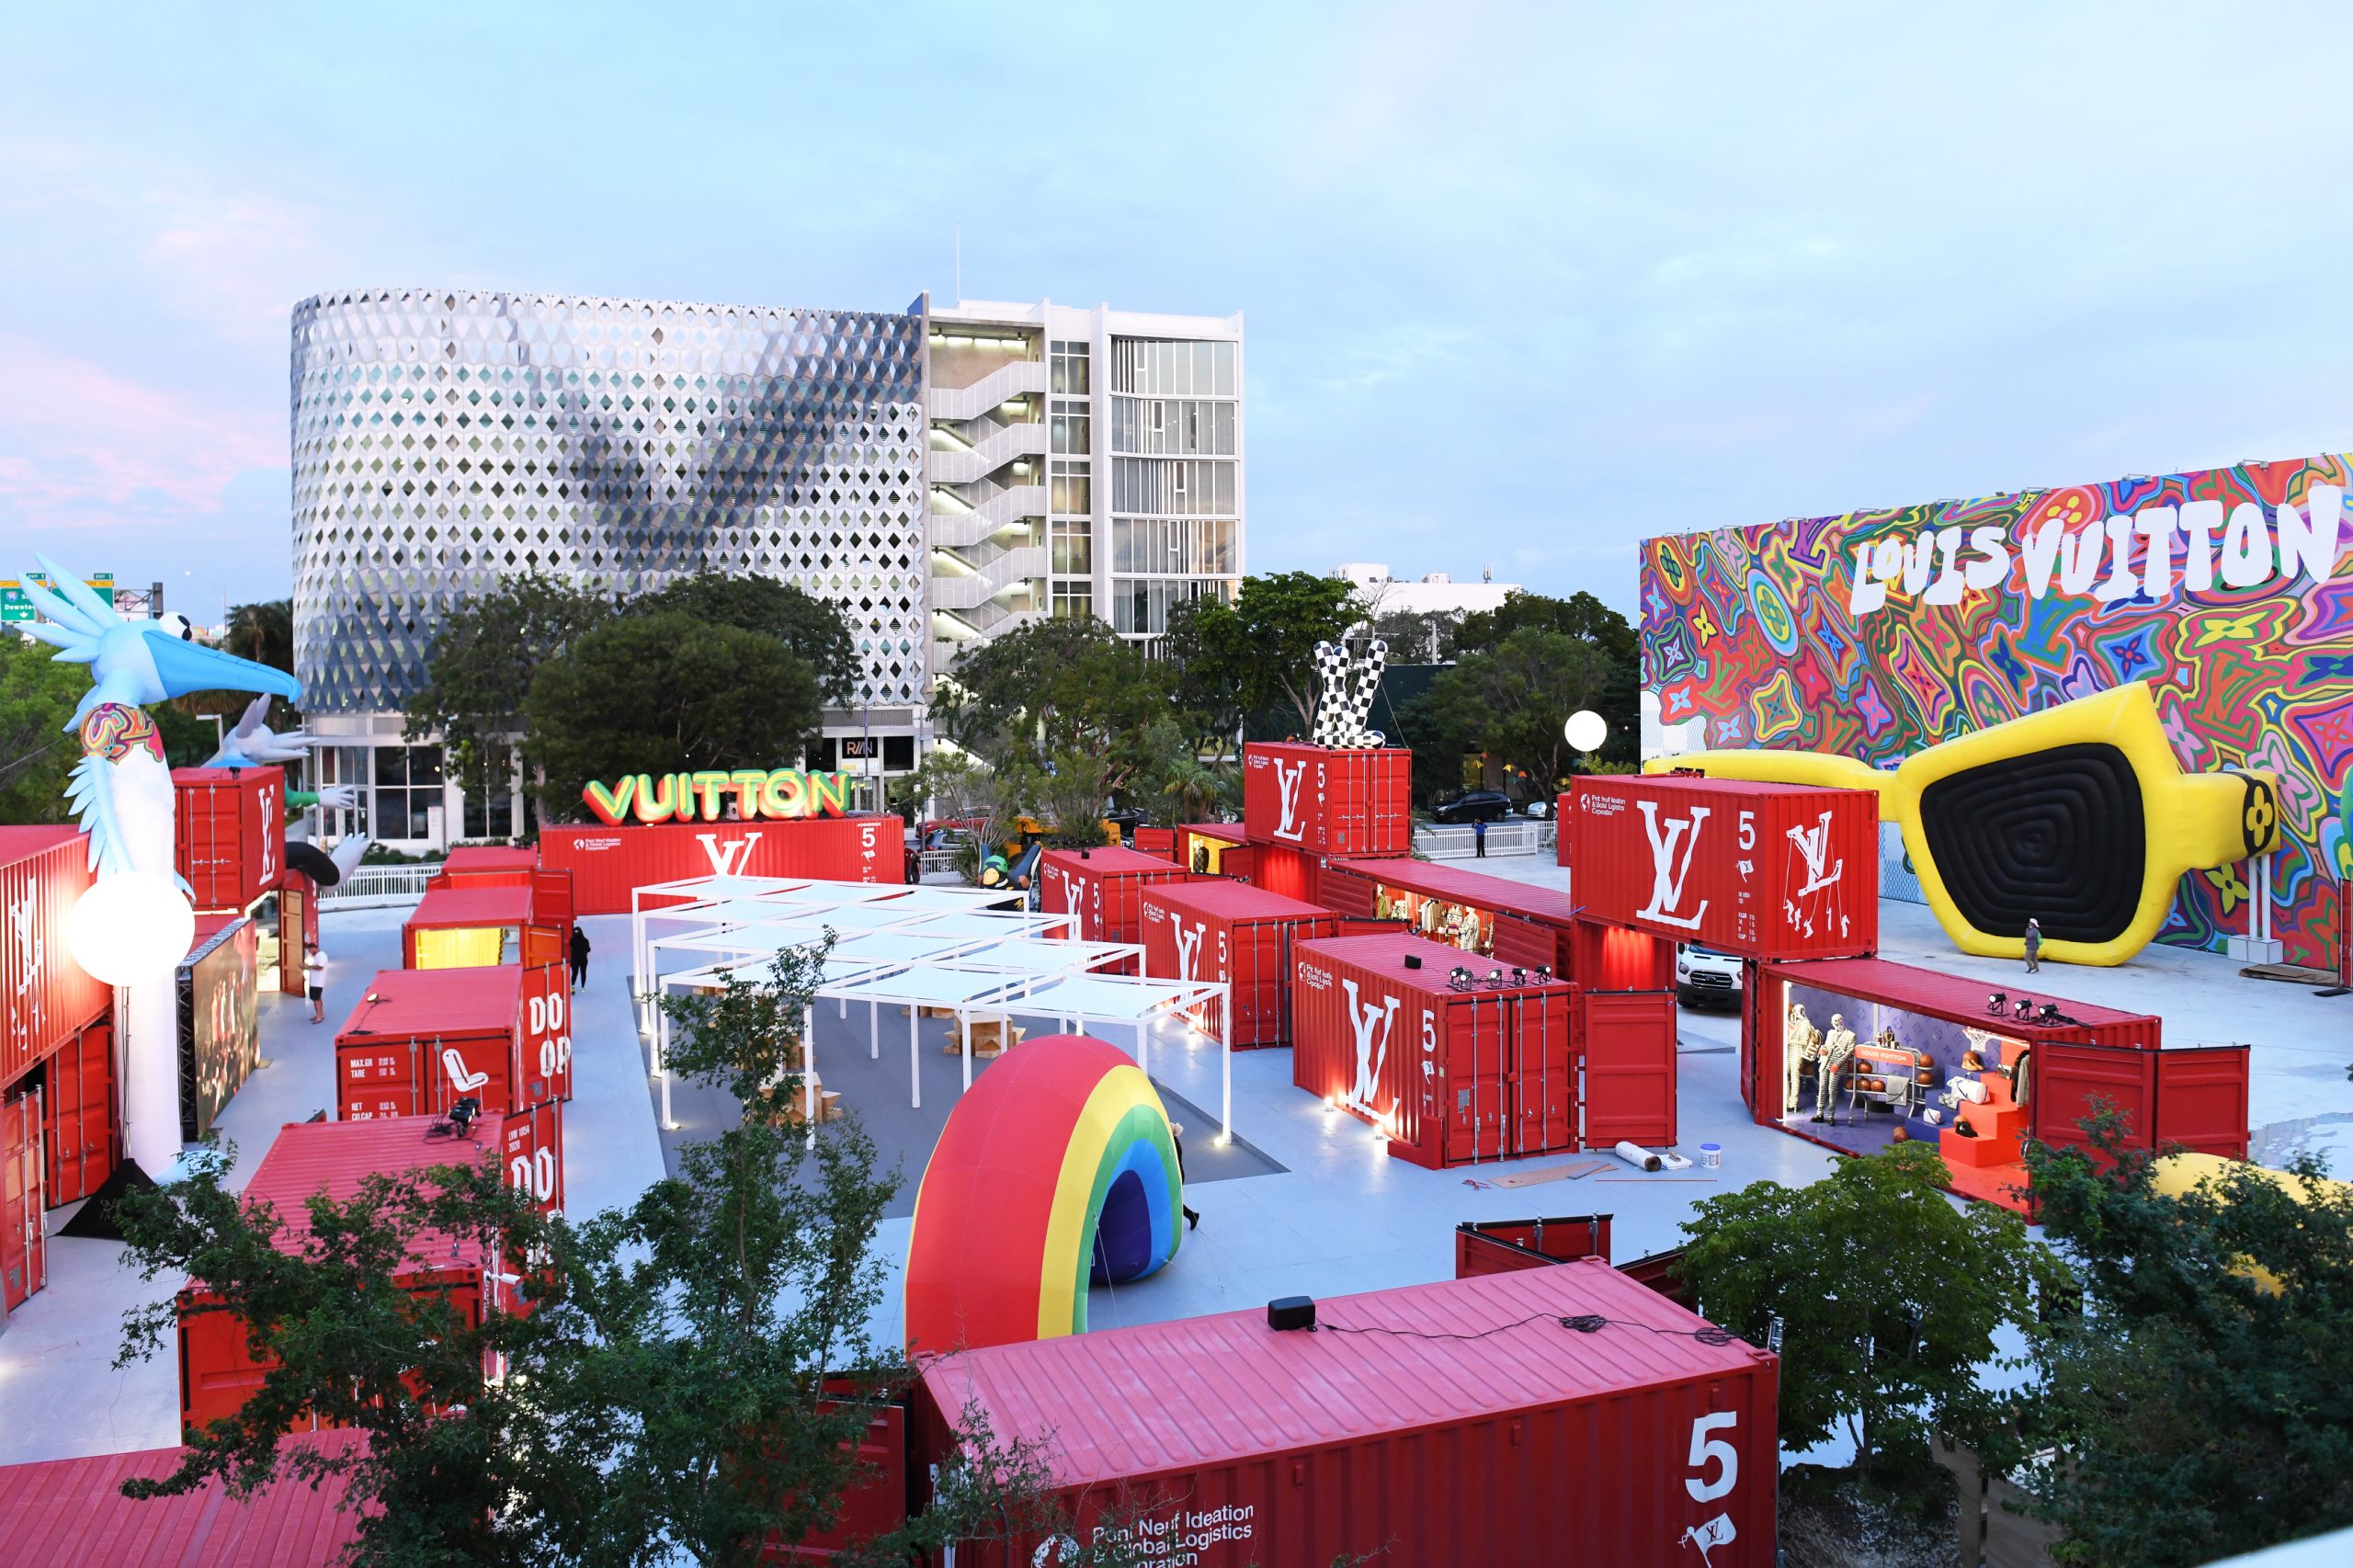 Keeping the Art and Fashion Fun Alive — Louis Vuitton's Traveling Art  Installation Brings Magic to the Miami Design District